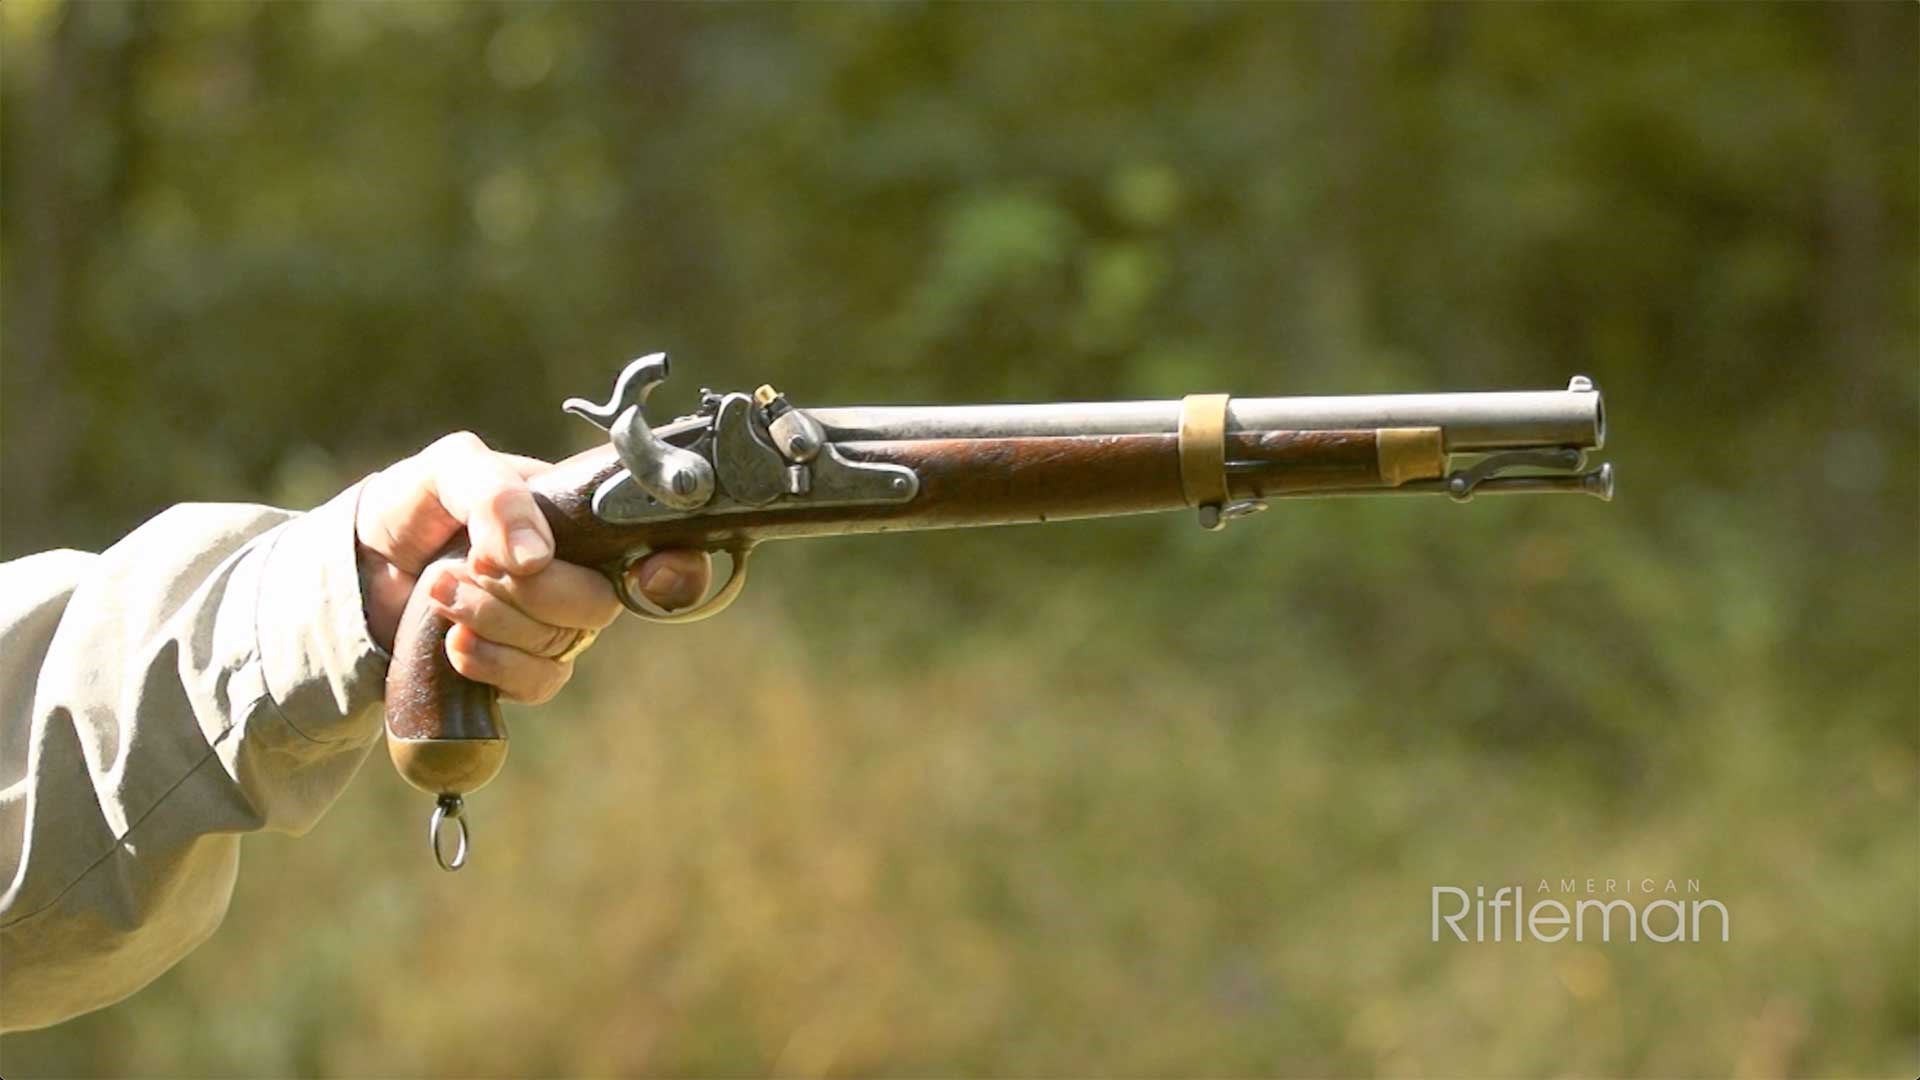 Man aiming the U.S. Model 1855 pistol carbine without a shoulder stock attached against a green, outdoors background.